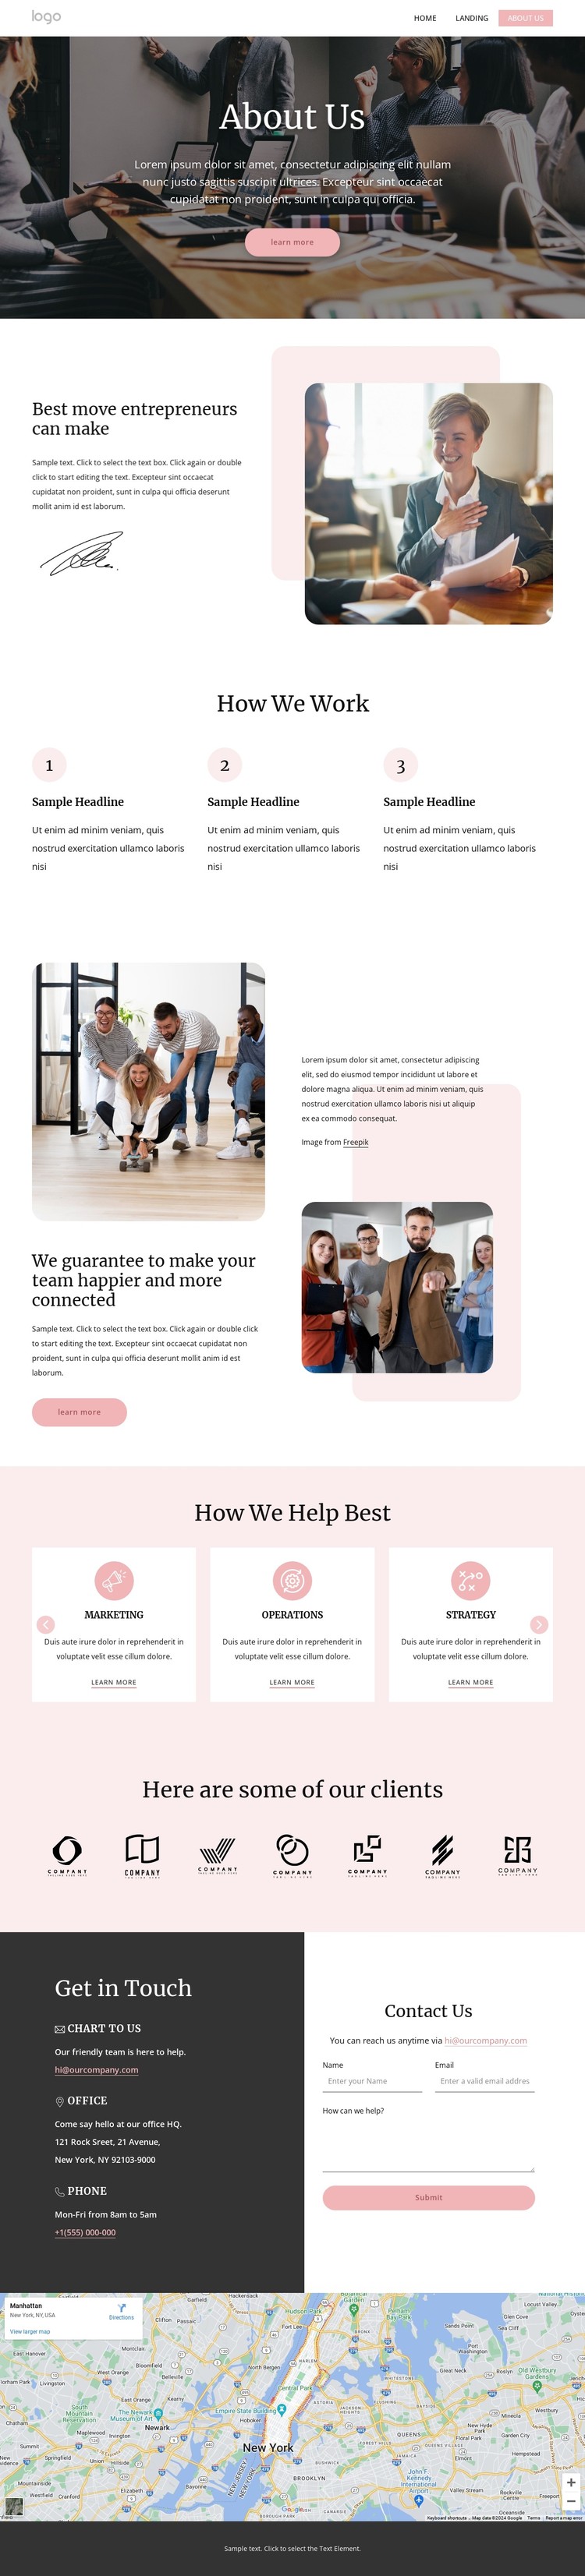 Team building expertise CSS Template